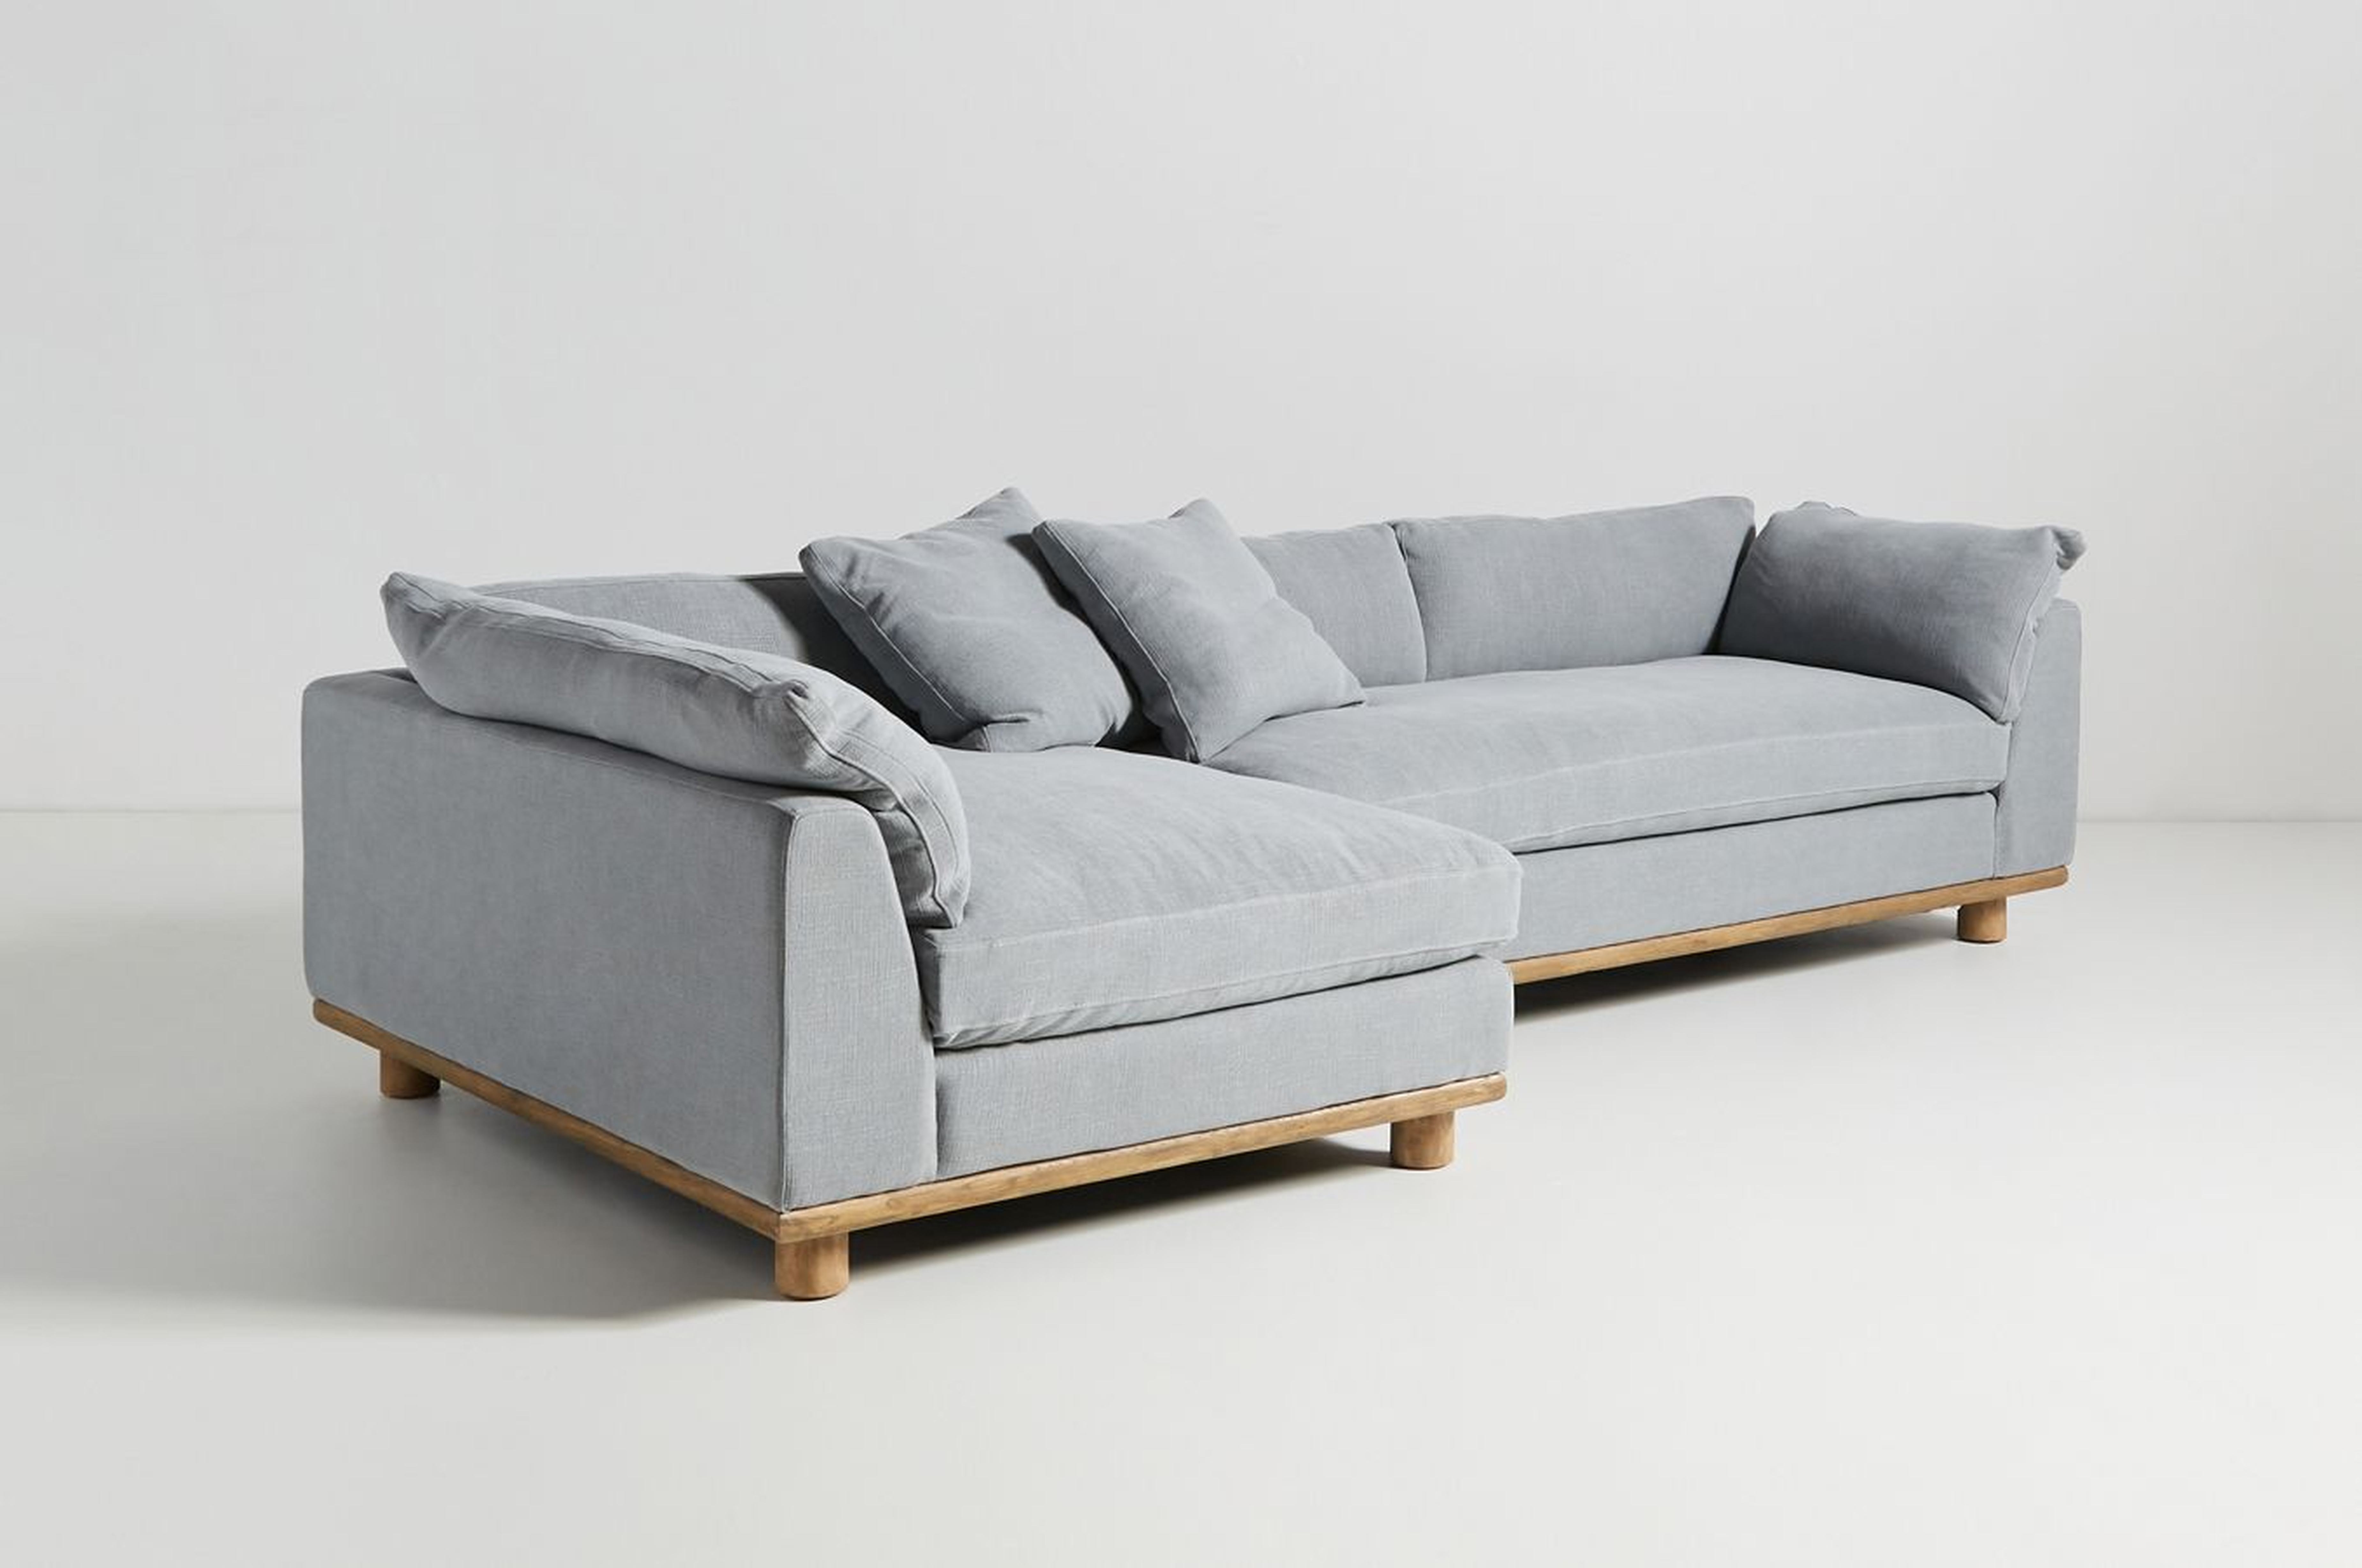 Relaxed Saguaro Sectional By Anthropologie - Nimbus Valecia Linen - Anthropologie